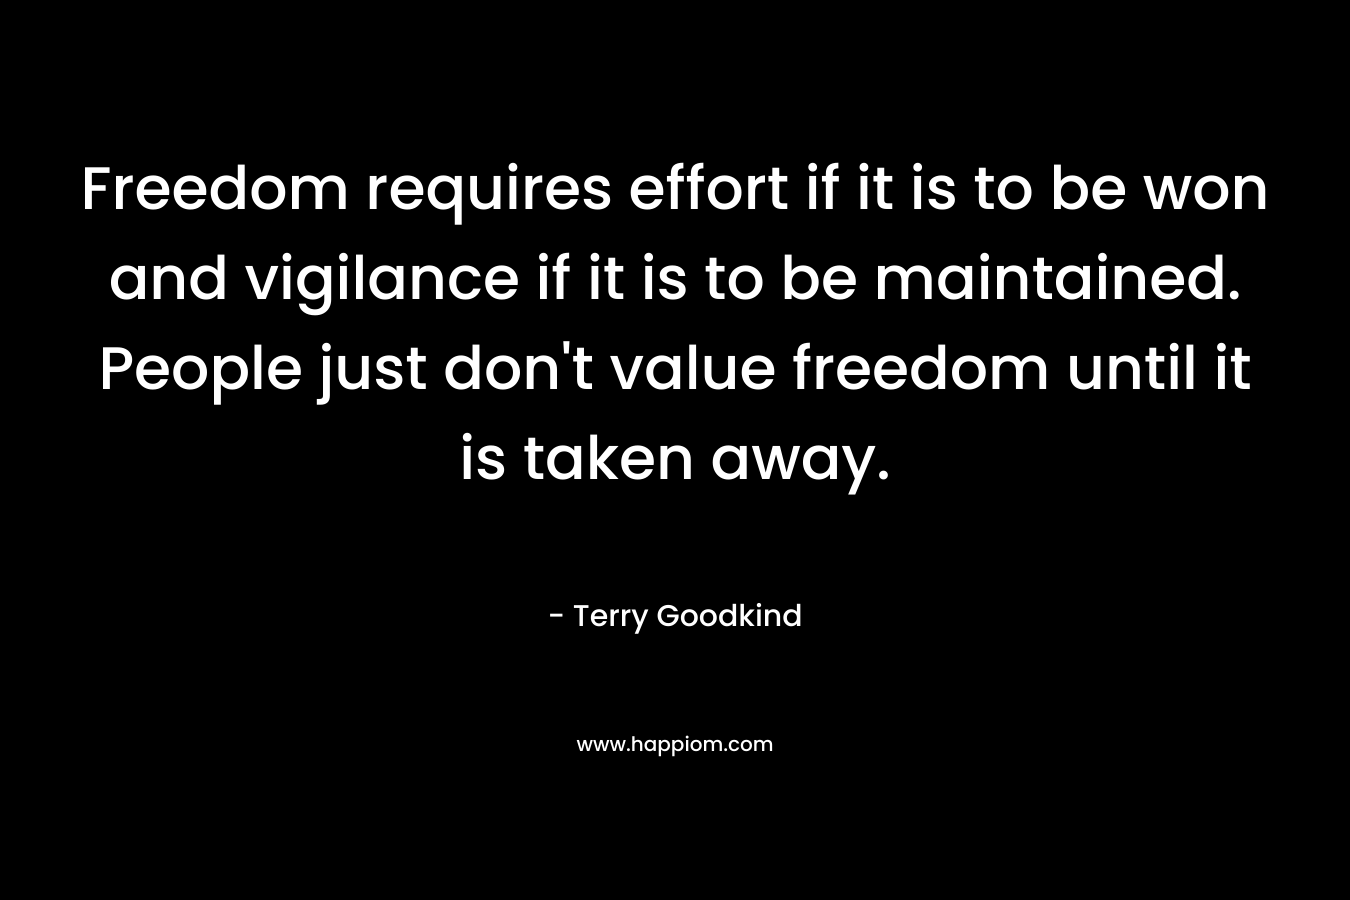 Freedom requires effort if it is to be won and vigilance if it is to be maintained. People just don’t value freedom until it is taken away. – Terry Goodkind